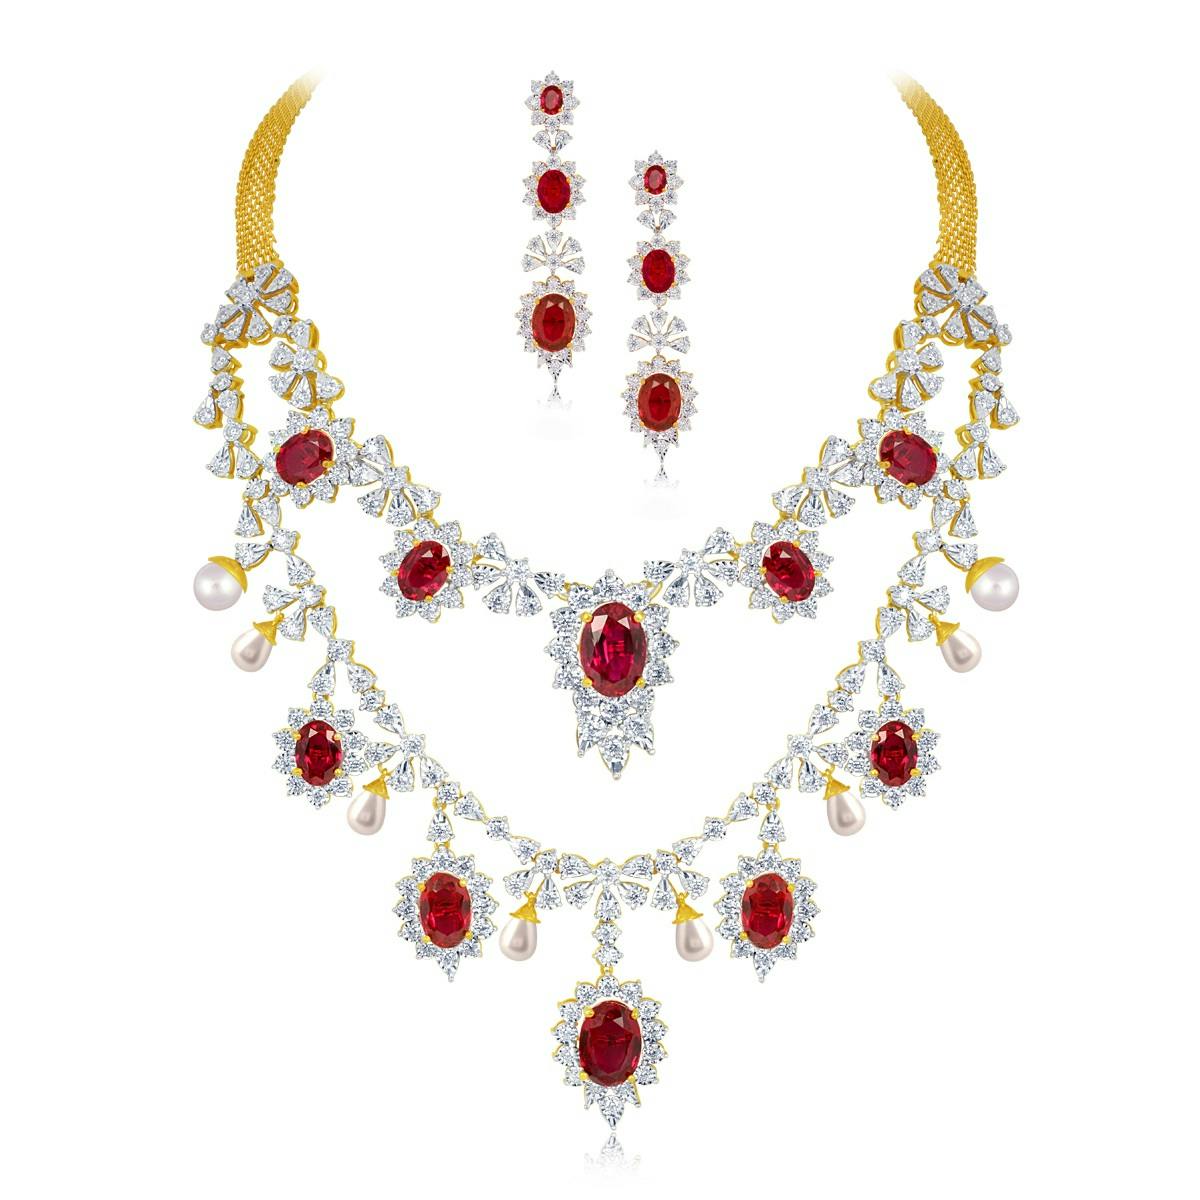 Glorious Rubies necklace set